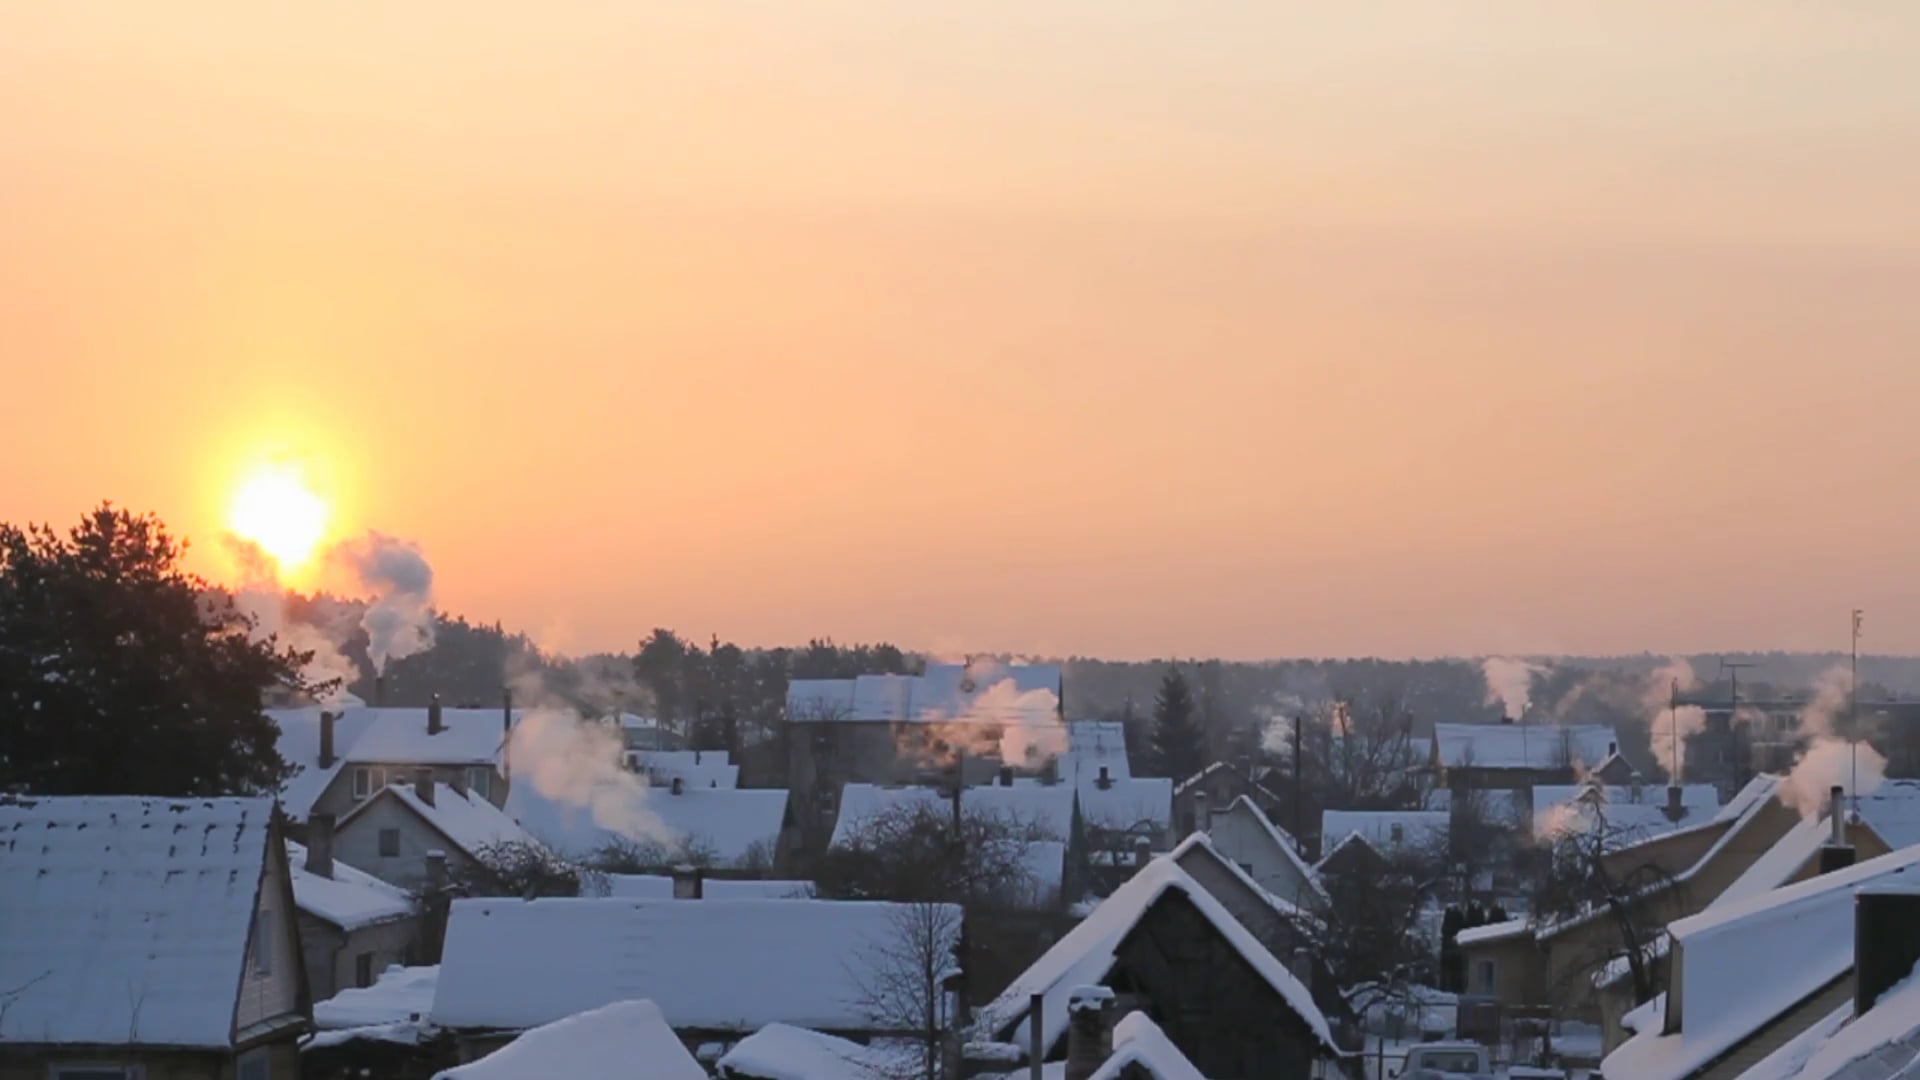 Snowy Town 2 Looped HD Free Stock Video Footage